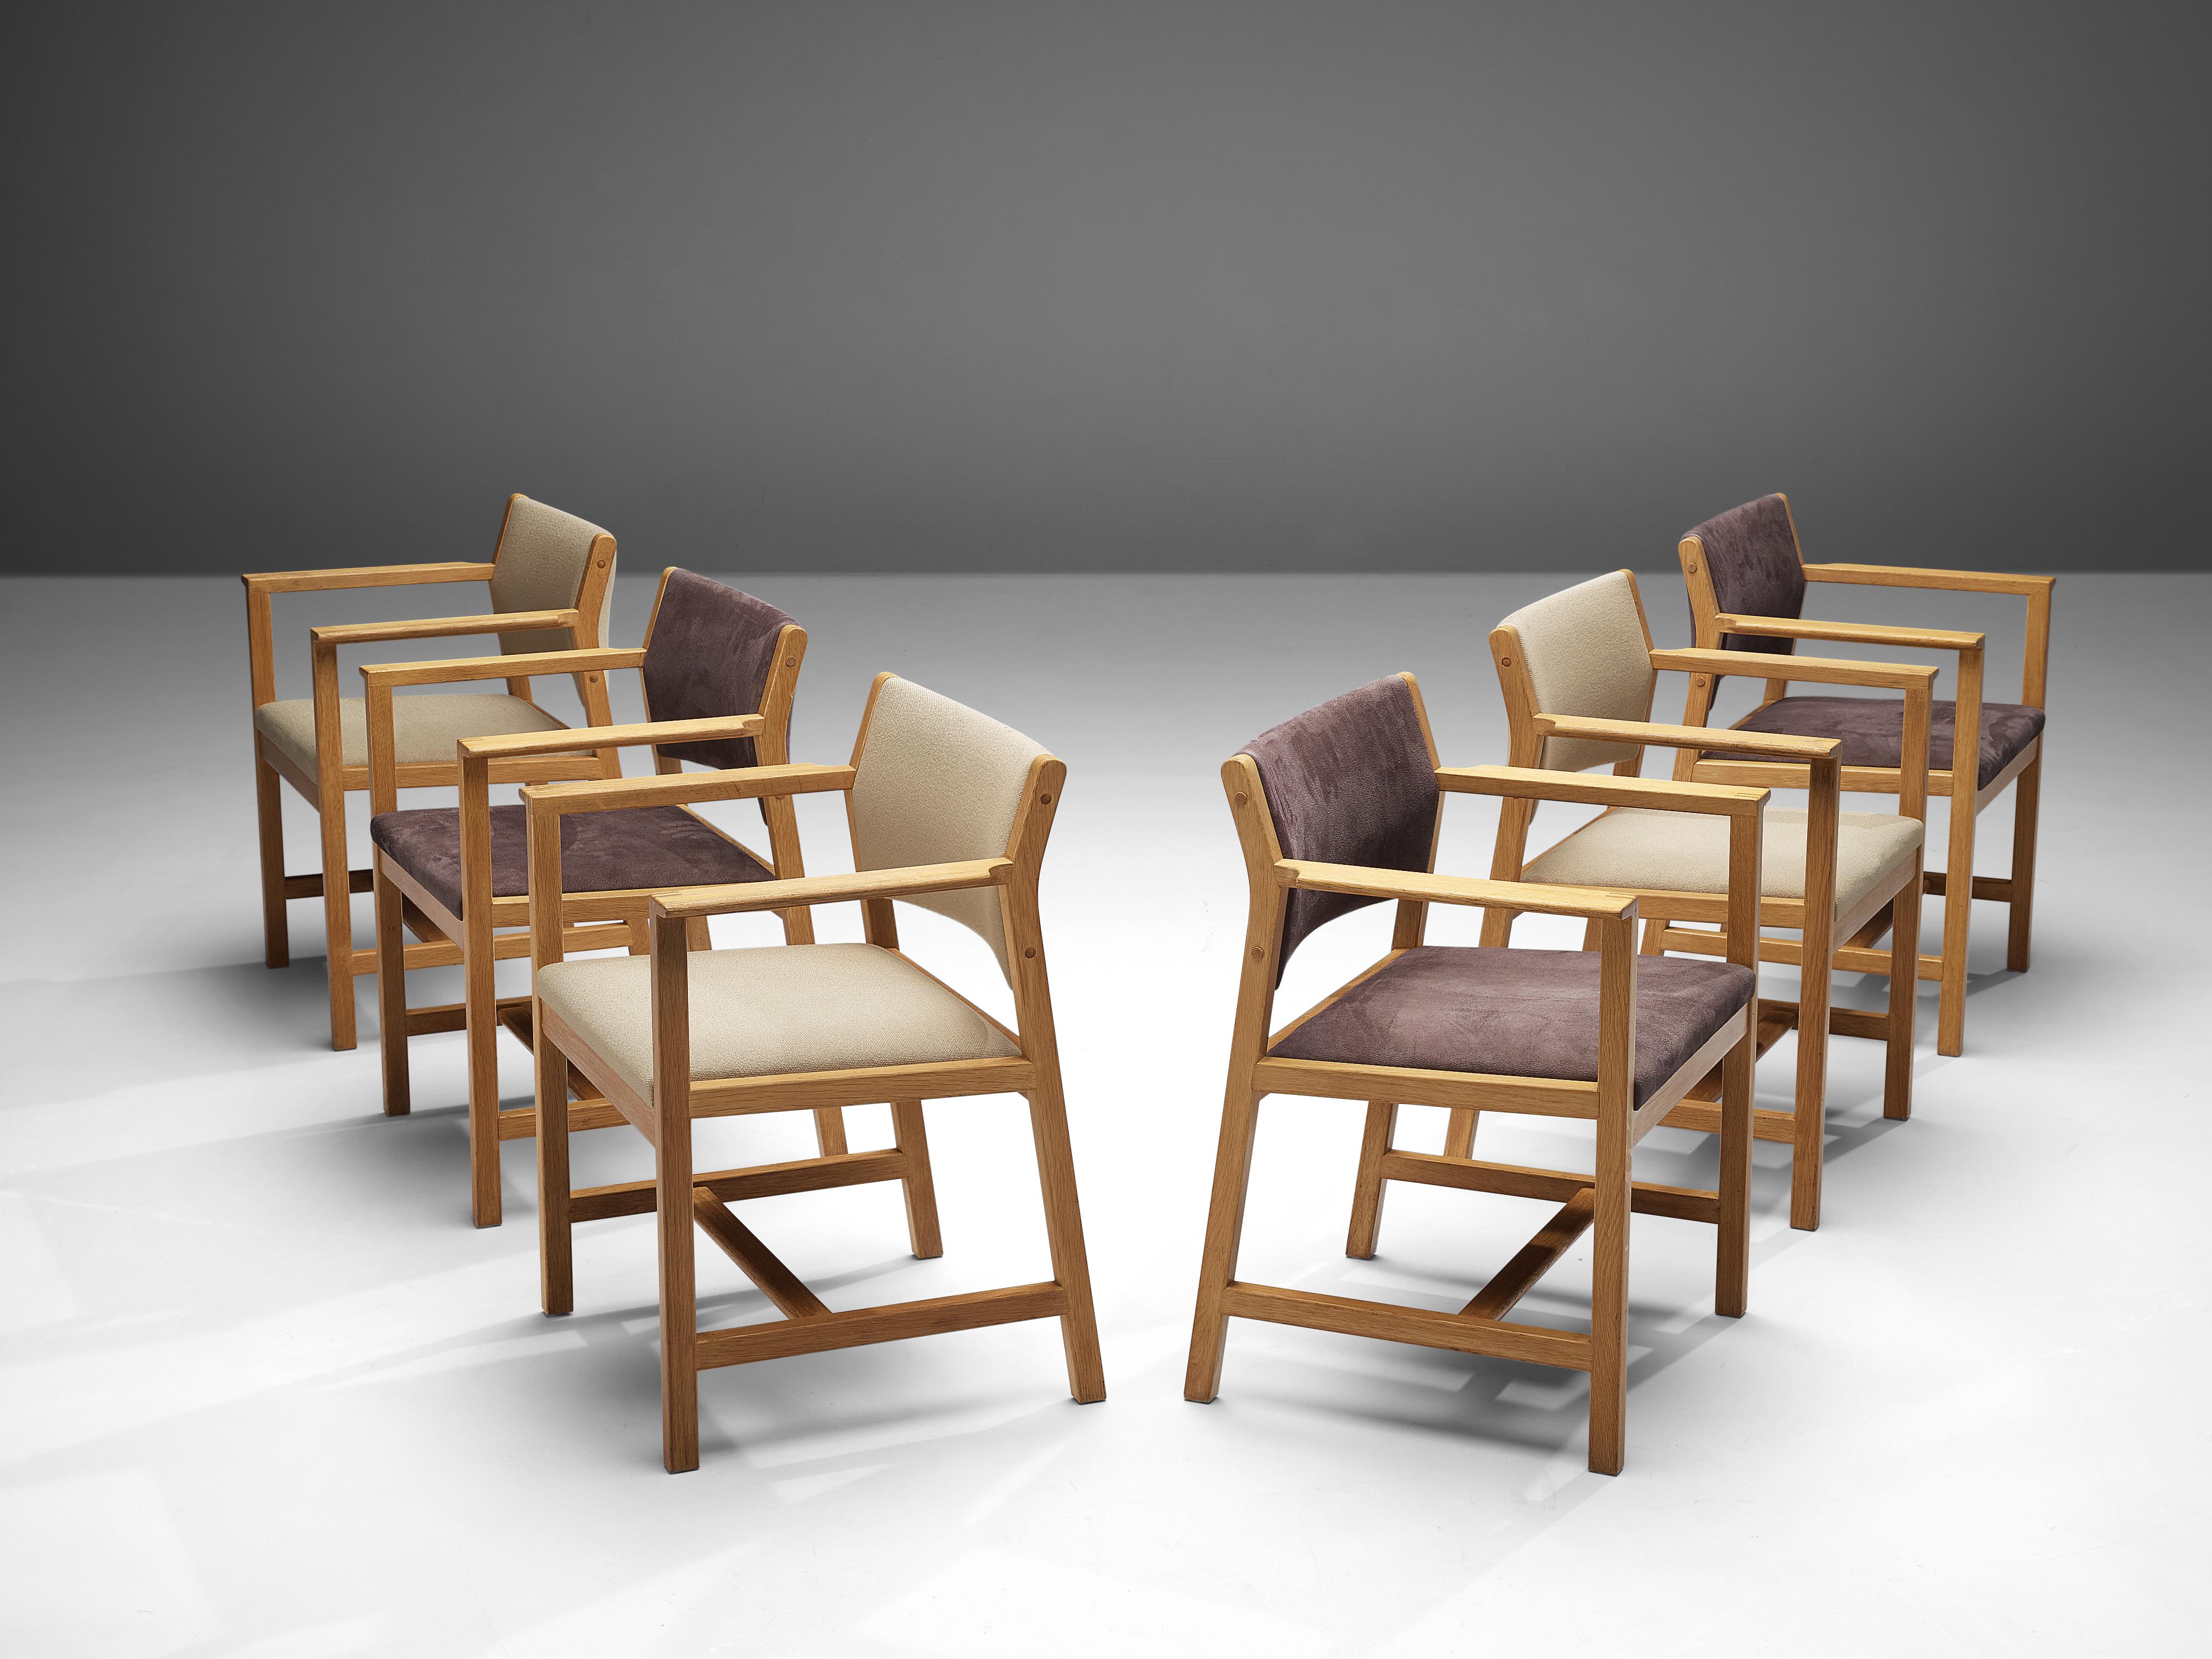 Børge Morgensen for A/S Fredericia Stolefabrik, set of six armchairs model 'BM 73', oak, suede, wool, Denmark, design 1960

Well-proportioned chairs designed by the Danish designer Børge Morgensen. The style of this armchair is characterized by